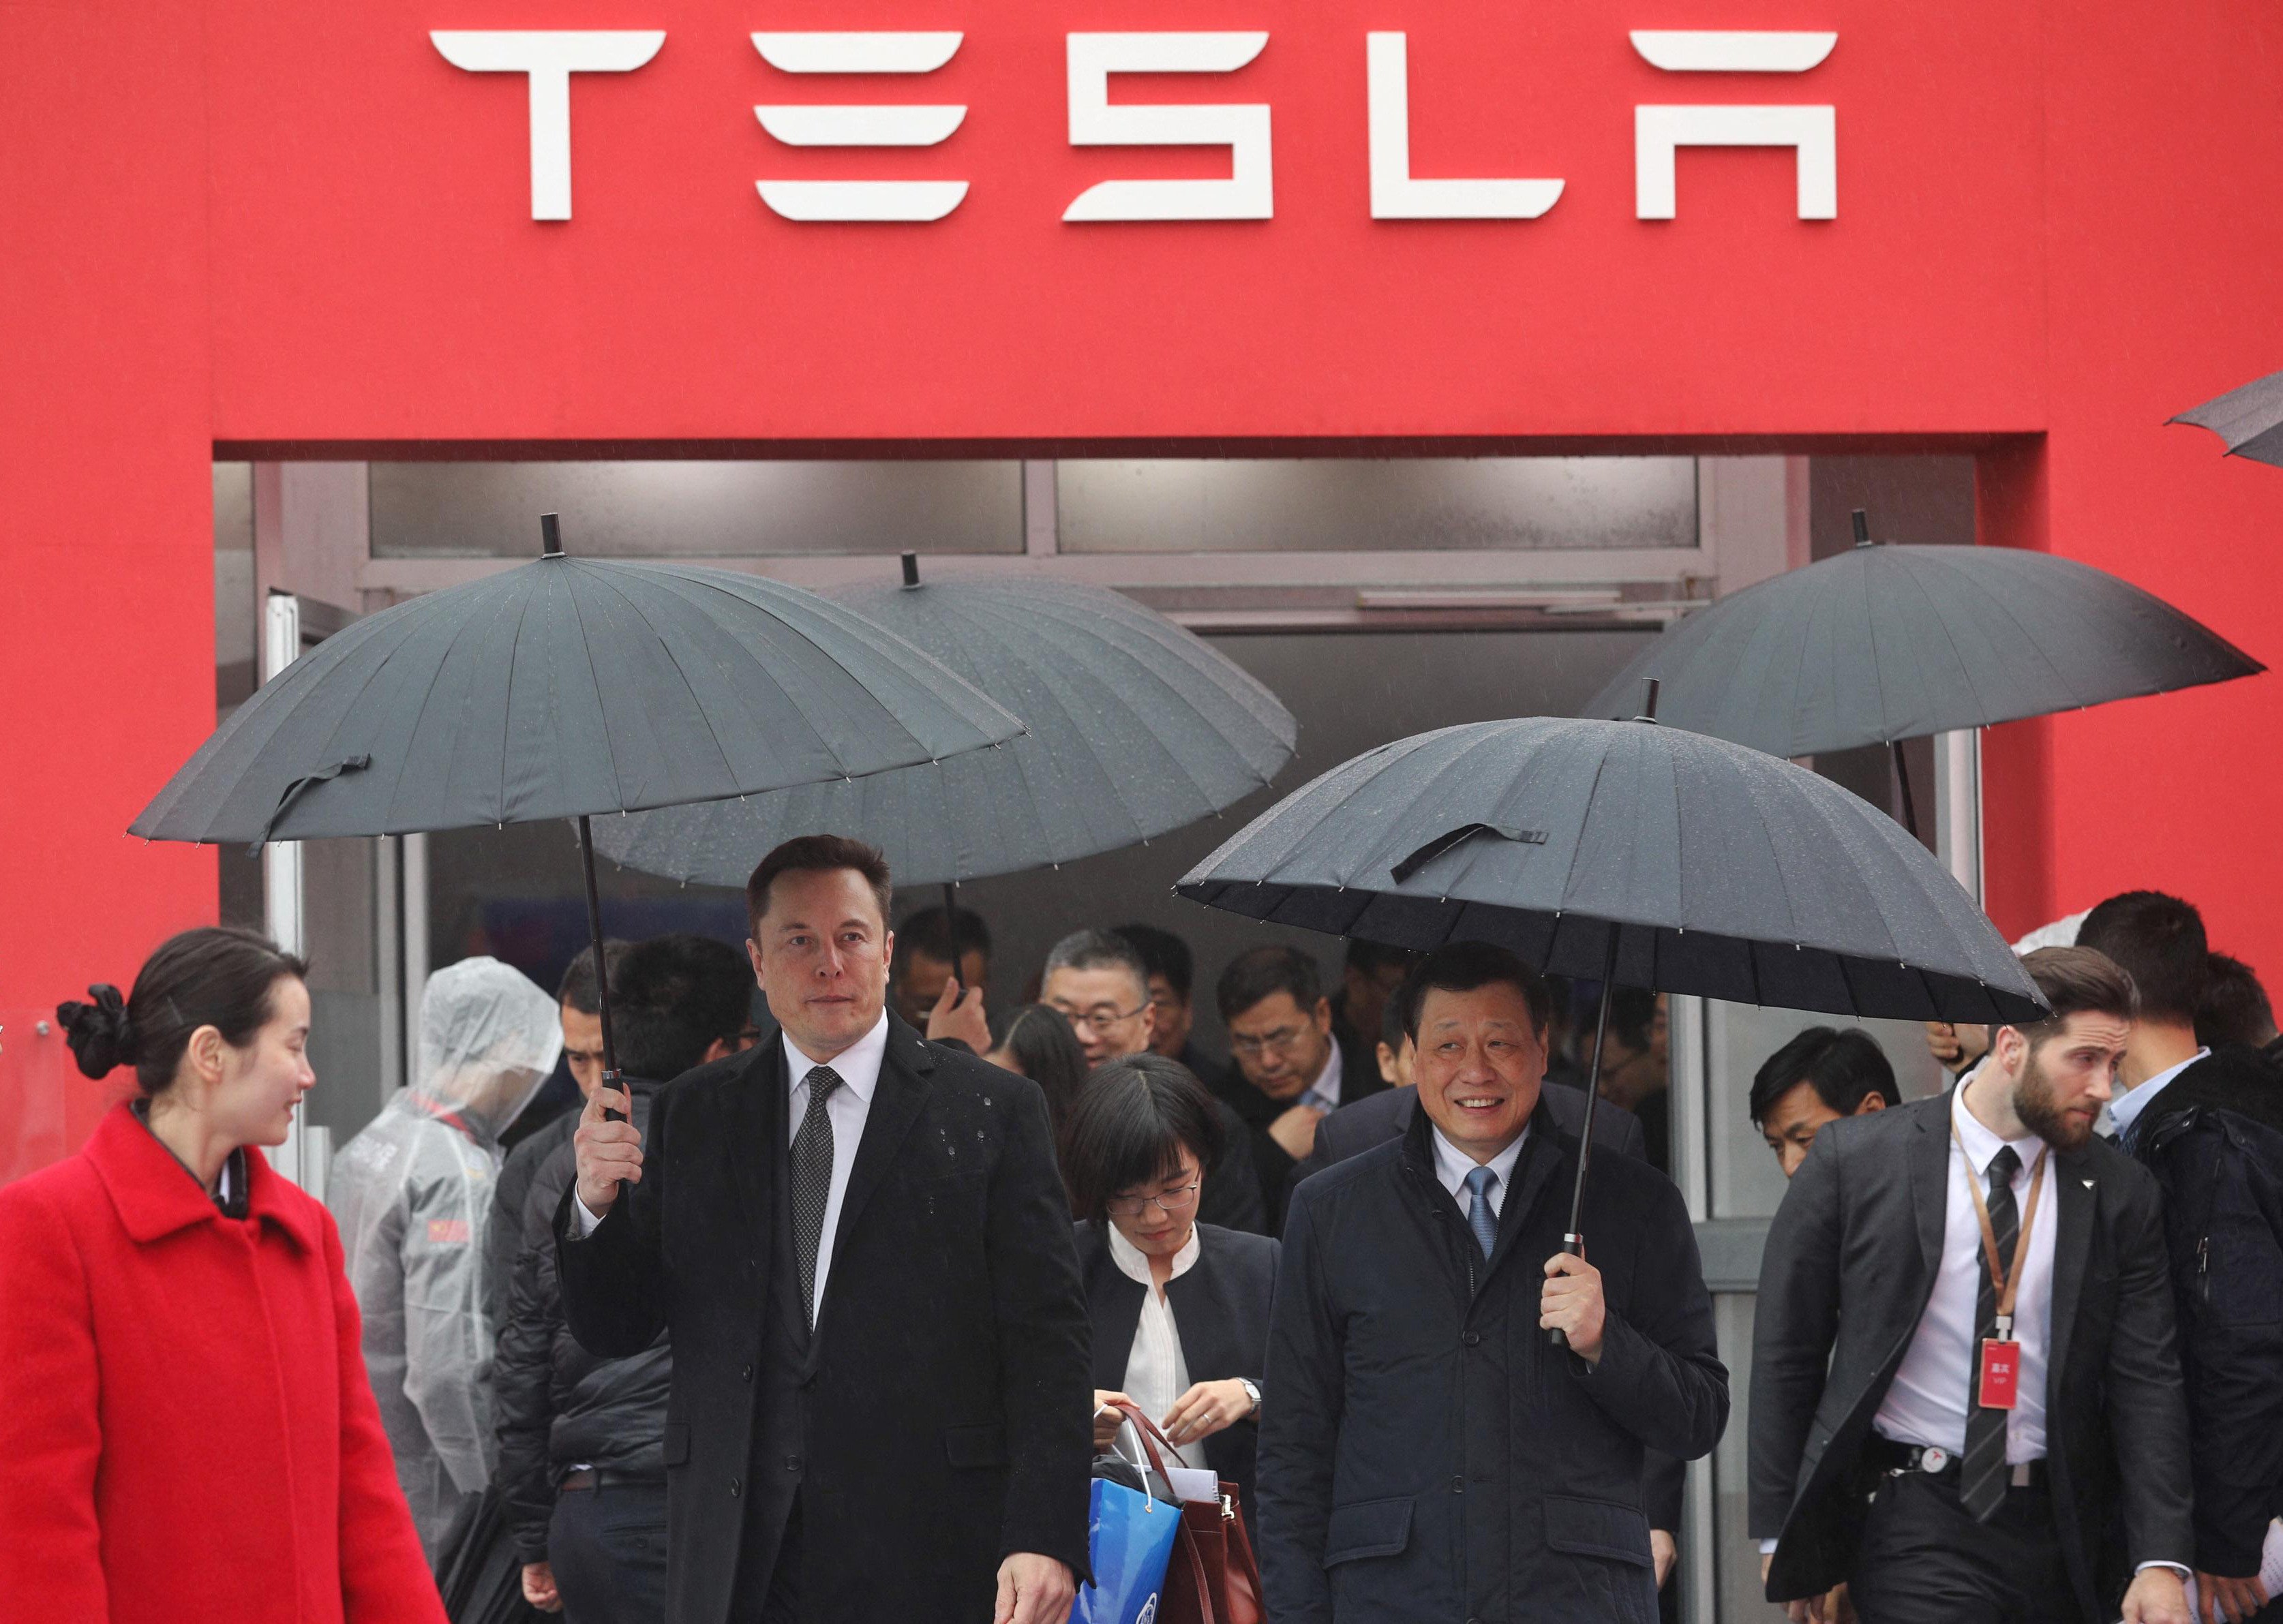 Tesla CEO Elon Musk (left) walks with Shanghai Mayor Ying Yong during the ground-breaking ceremony for a Tesla factory in Shanghai on January 7, 2019. Photo: AFP